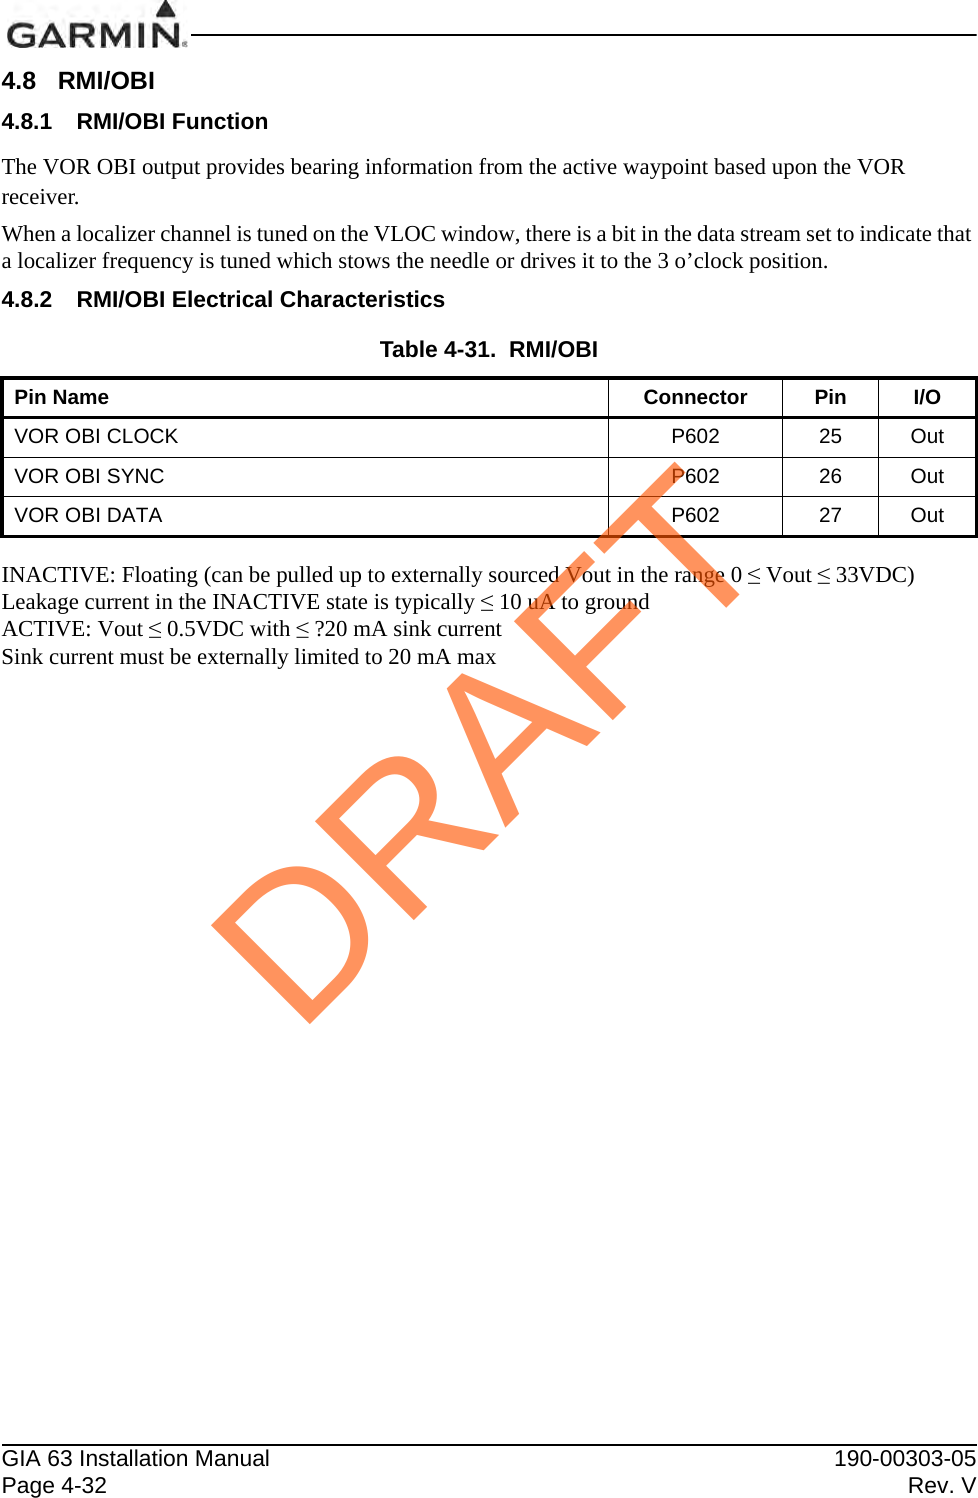 GIA 63 Installation Manual 190-00303-05Page 4-32 Rev. V4.8 RMI/OBI4.8.1 RMI/OBI FunctionThe VOR OBI output provides bearing information from the active waypoint based upon the VOR receiver.When a localizer channel is tuned on the VLOC window, there is a bit in the data stream set to indicate that a localizer frequency is tuned which stows the needle or drives it to the 3 o’clock position.4.8.2 RMI/OBI Electrical CharacteristicsINACTIVE: Floating (can be pulled up to externally sourced Vout in the range 0 ≤ Vout ≤ 33VDC)Leakage current in the INACTIVE state is typically ≤ 10 uA to groundACTIVE: Vout ≤ 0.5VDC with ≤ ?20 mA sink currentSink current must be externally limited to 20 mA maxTable 4-31.  RMI/OBIPin Name Connector Pin I/OVOR OBI CLOCK P602 25 OutVOR OBI SYNC P602 26 OutVOR OBI DATA P602 27 OutDRAFT